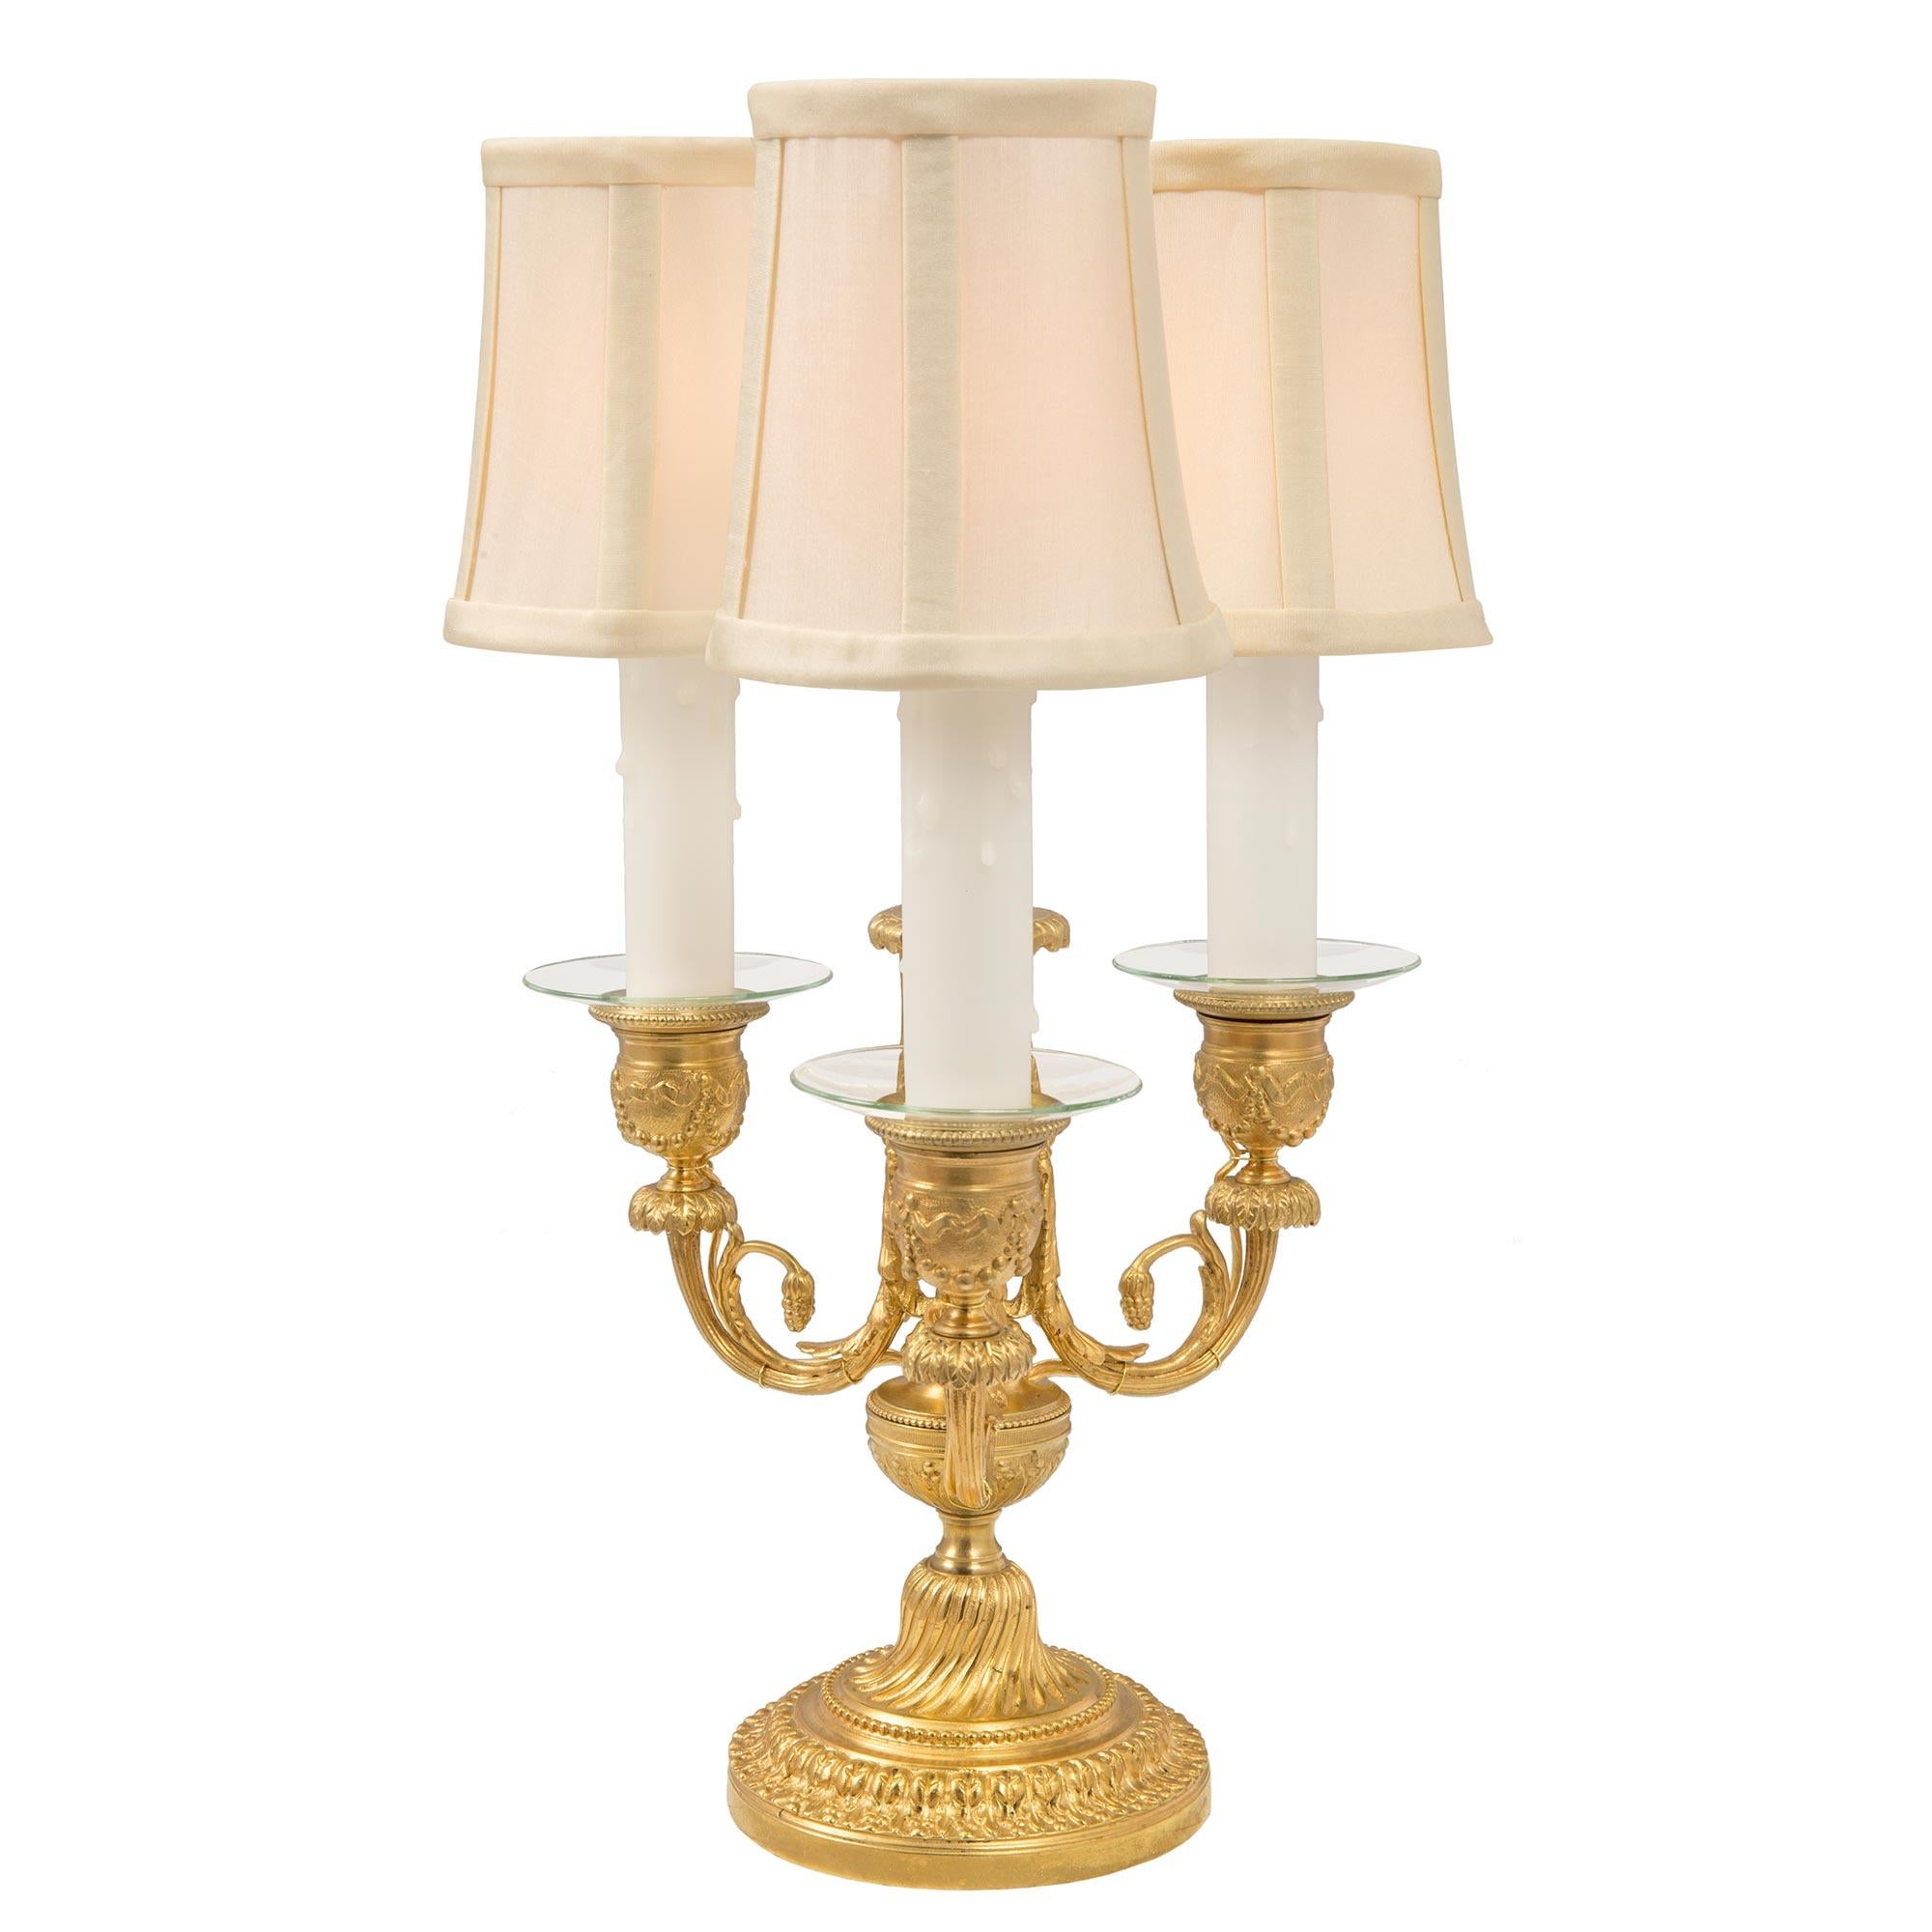 Pair of French 19th Century Louis XVI St. Ormolu Three Arm Candelabra Lamps In Good Condition For Sale In West Palm Beach, FL